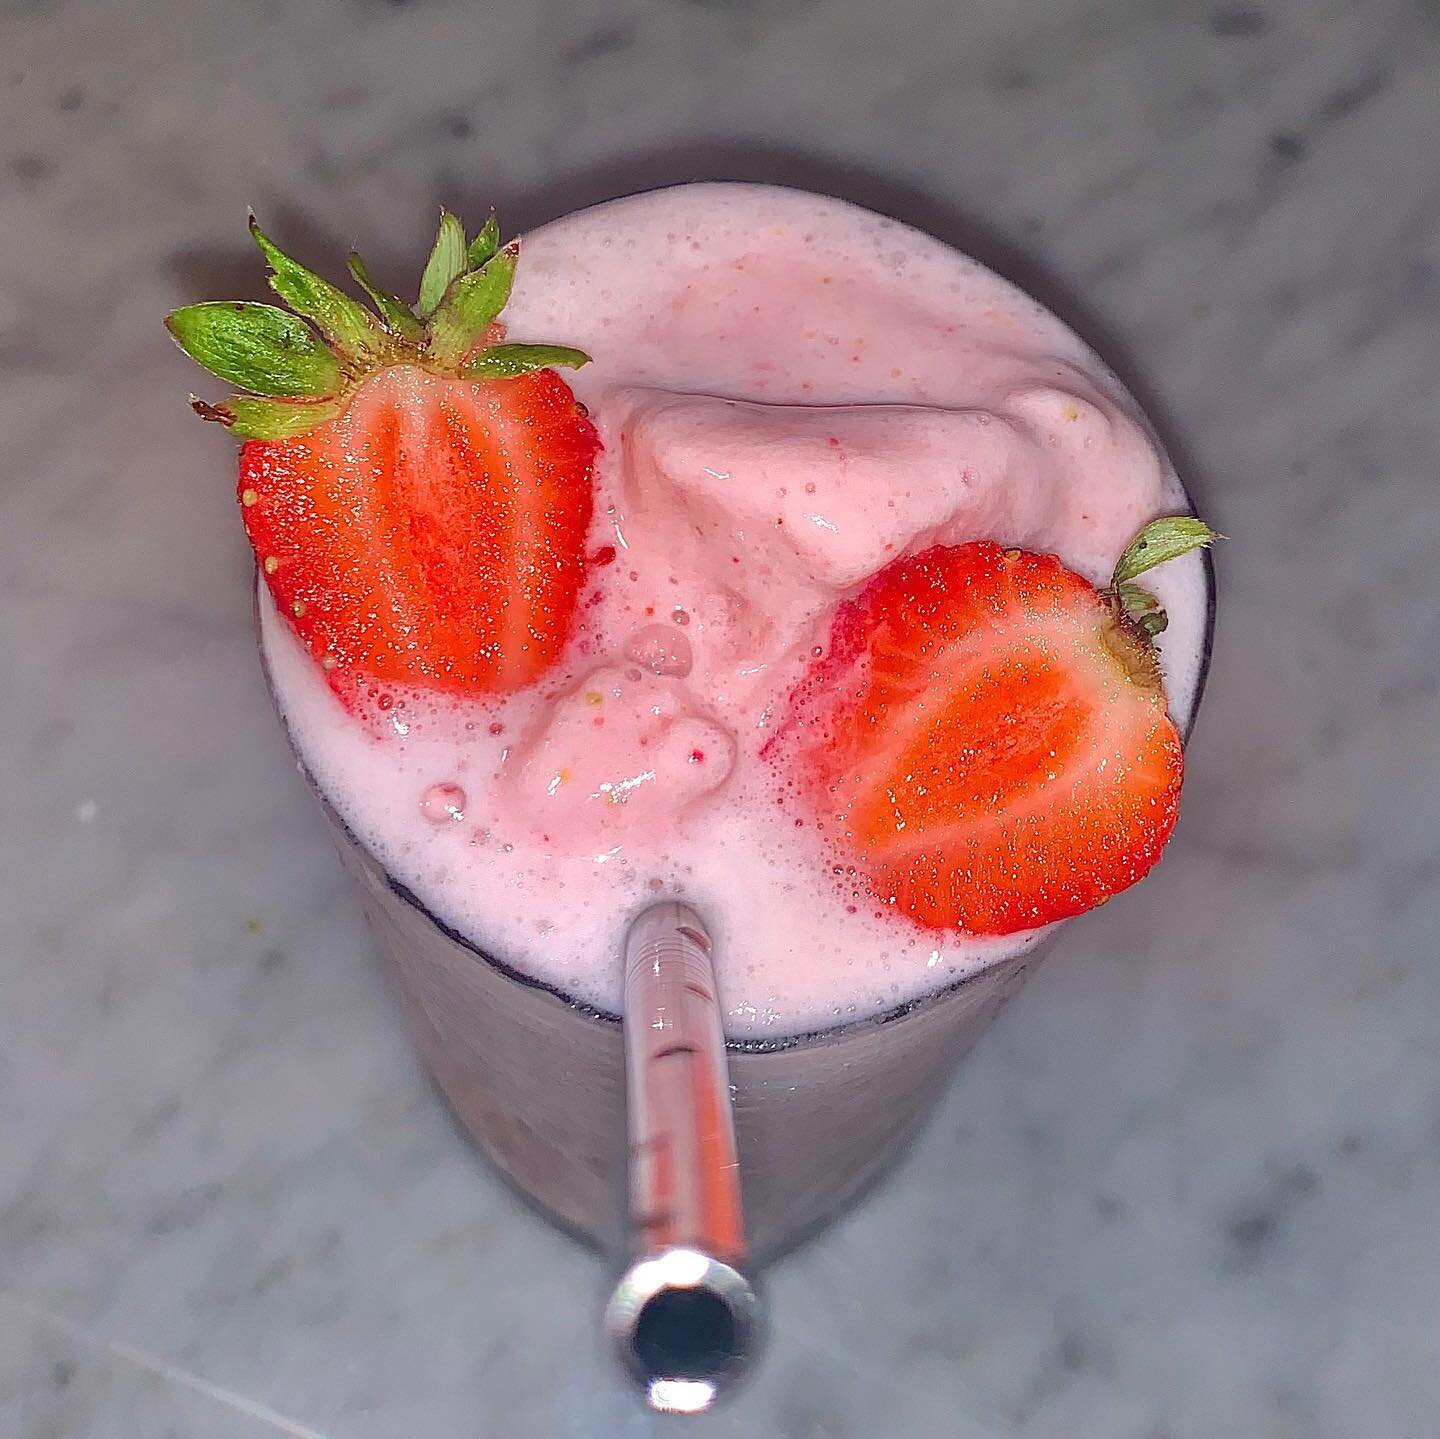 Strawberry shortcake shake🍰 
_______________________________________________
Anyone remember those @GoodHumor strawberry shortcake pops? Here&rsquo;s a recreation of that summer staple in honor of Labor Day
__________________________________________